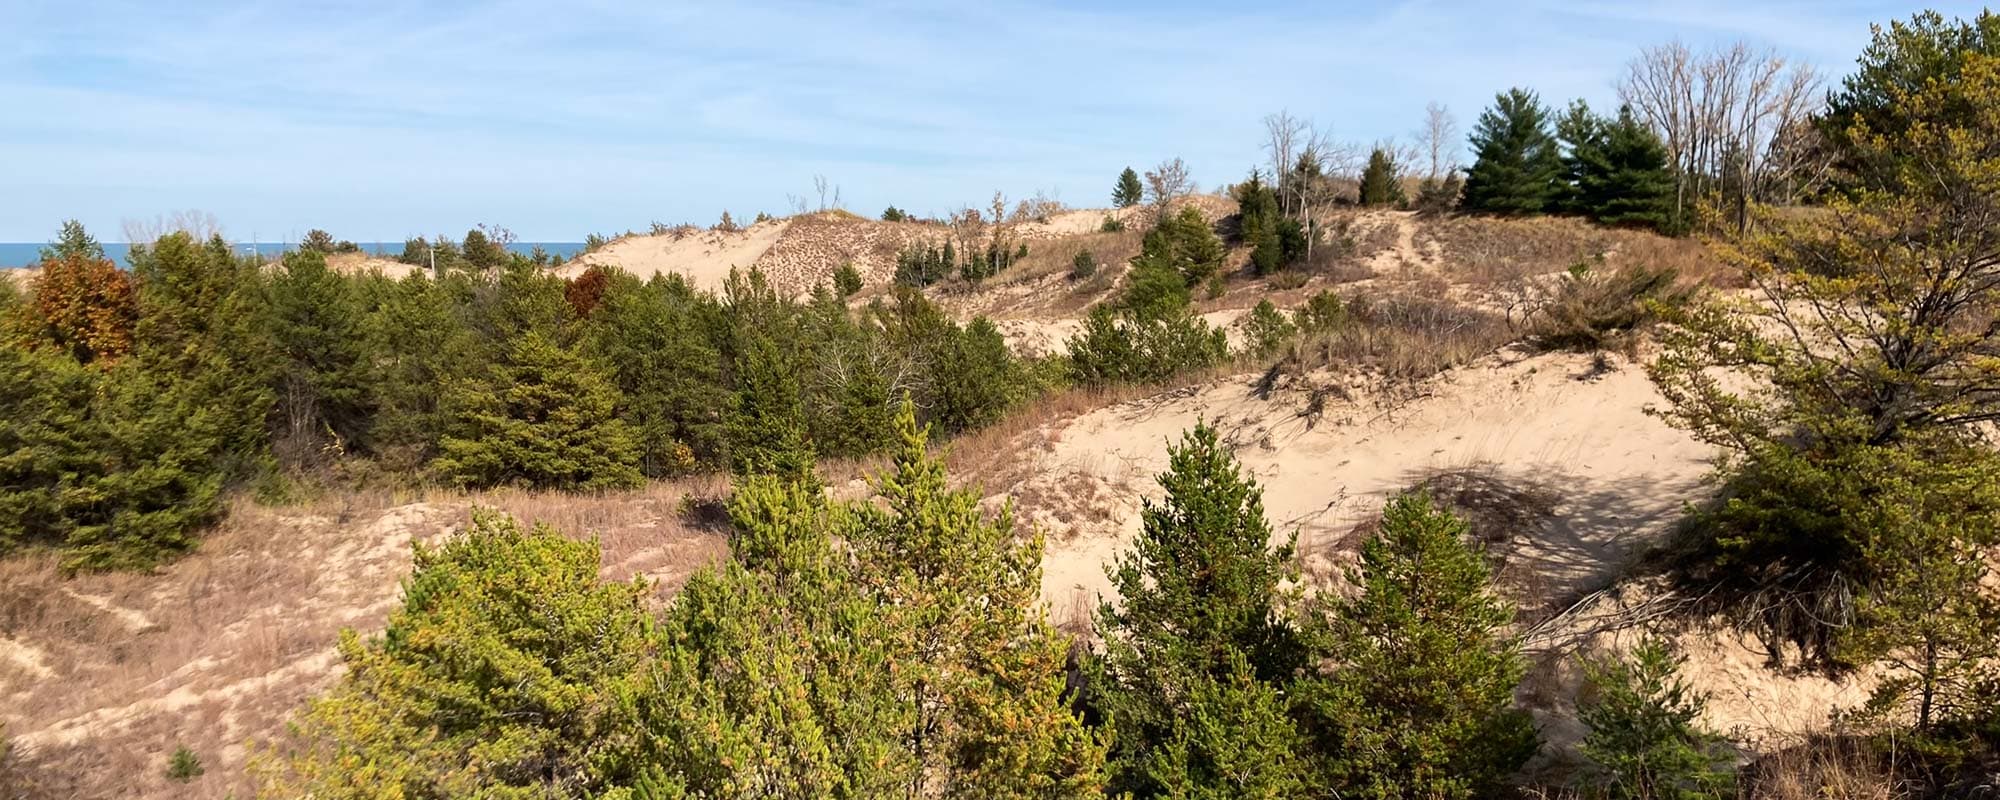 Sand dunes in Indiana Dunes National Park, Indiana